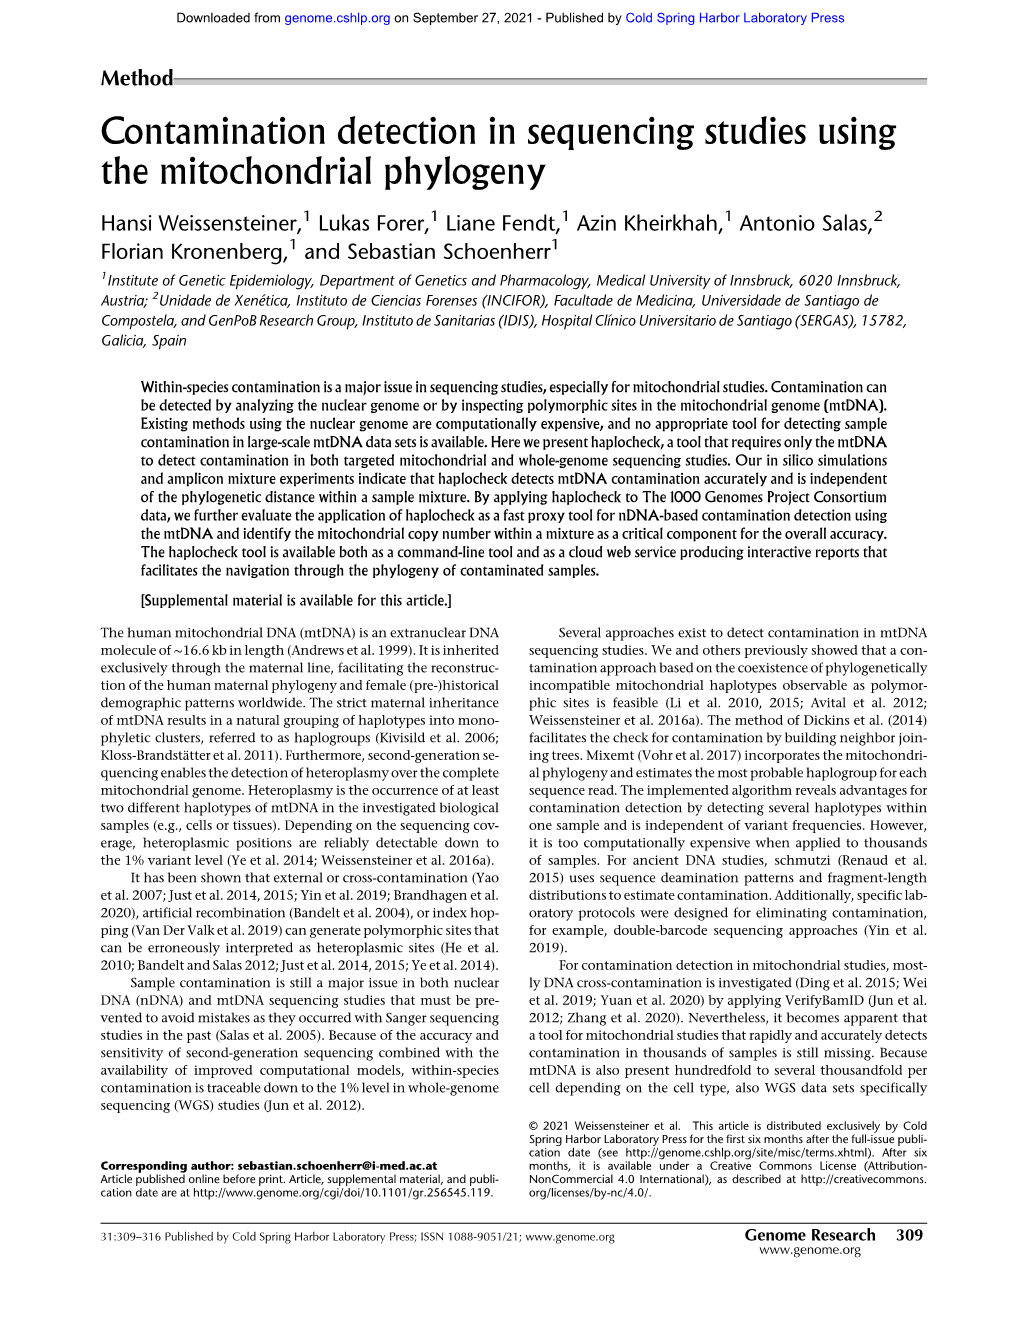 Contamination Detection in Sequencing Studies Using the Mitochondrial Phylogeny